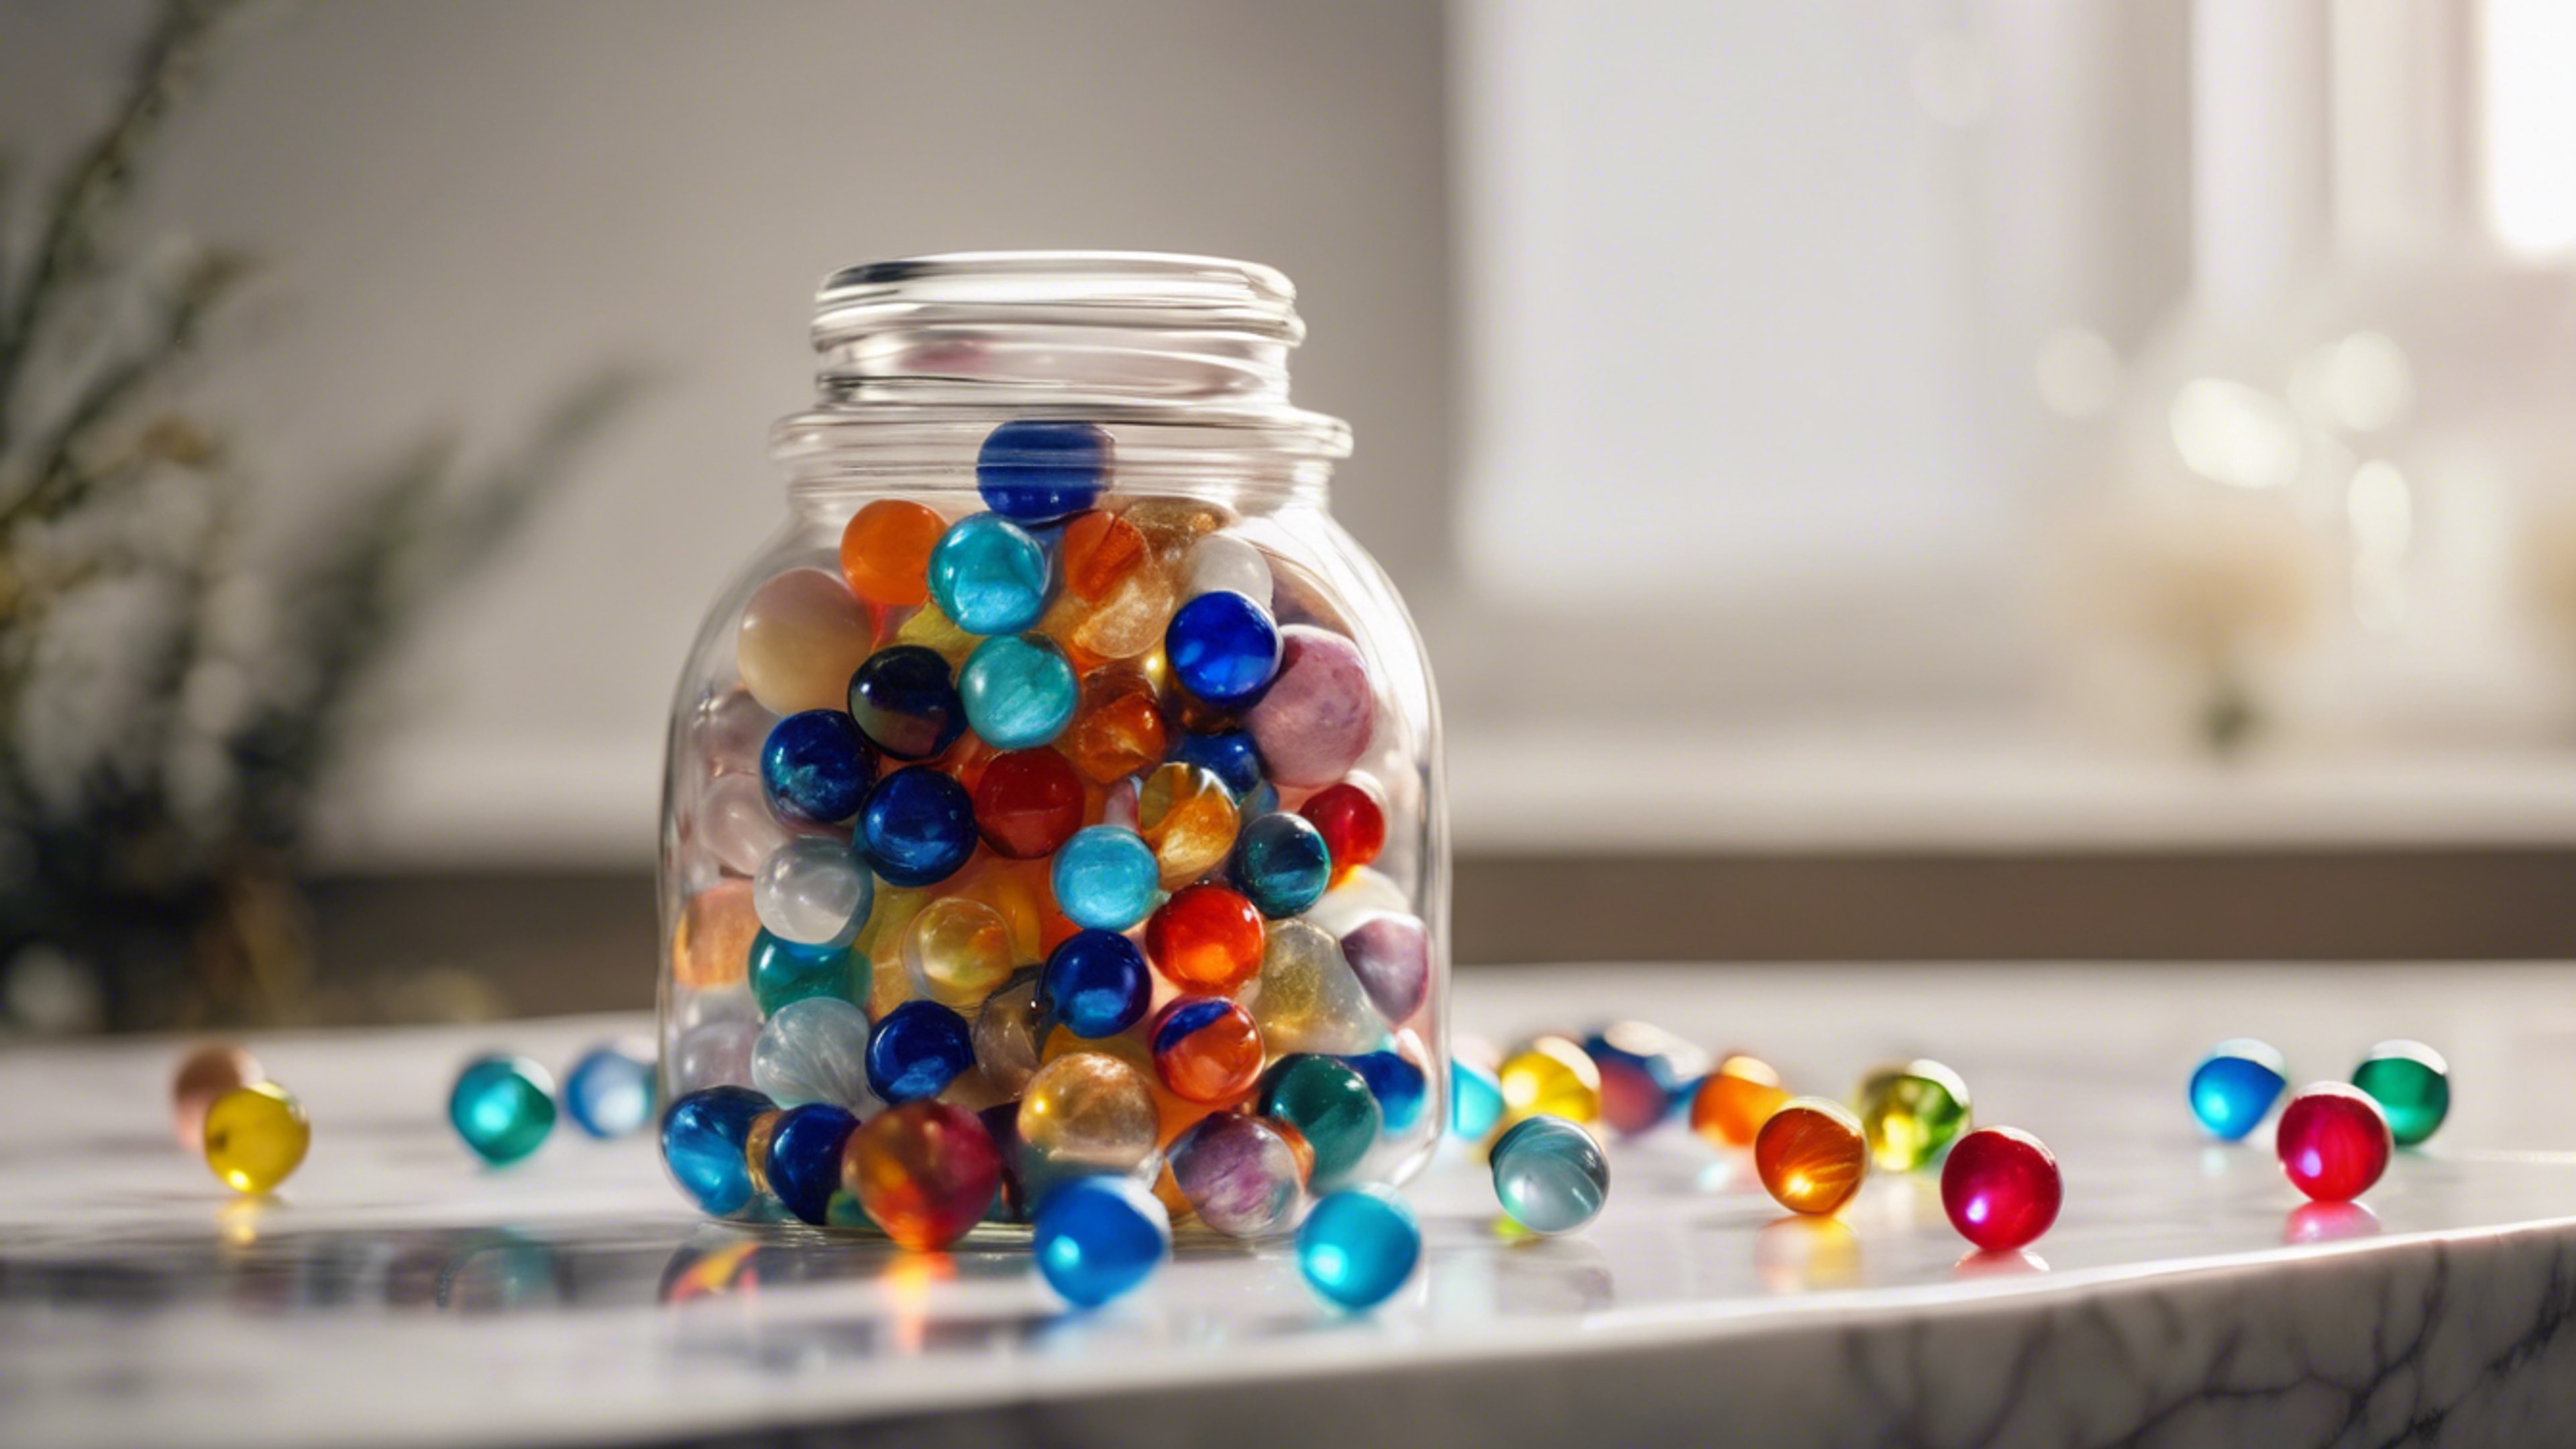 A glass jar full of colorful marbles with glinting lights around them, placed on a white marble surface. Tapeta[9438bf9259b84d3ca042]